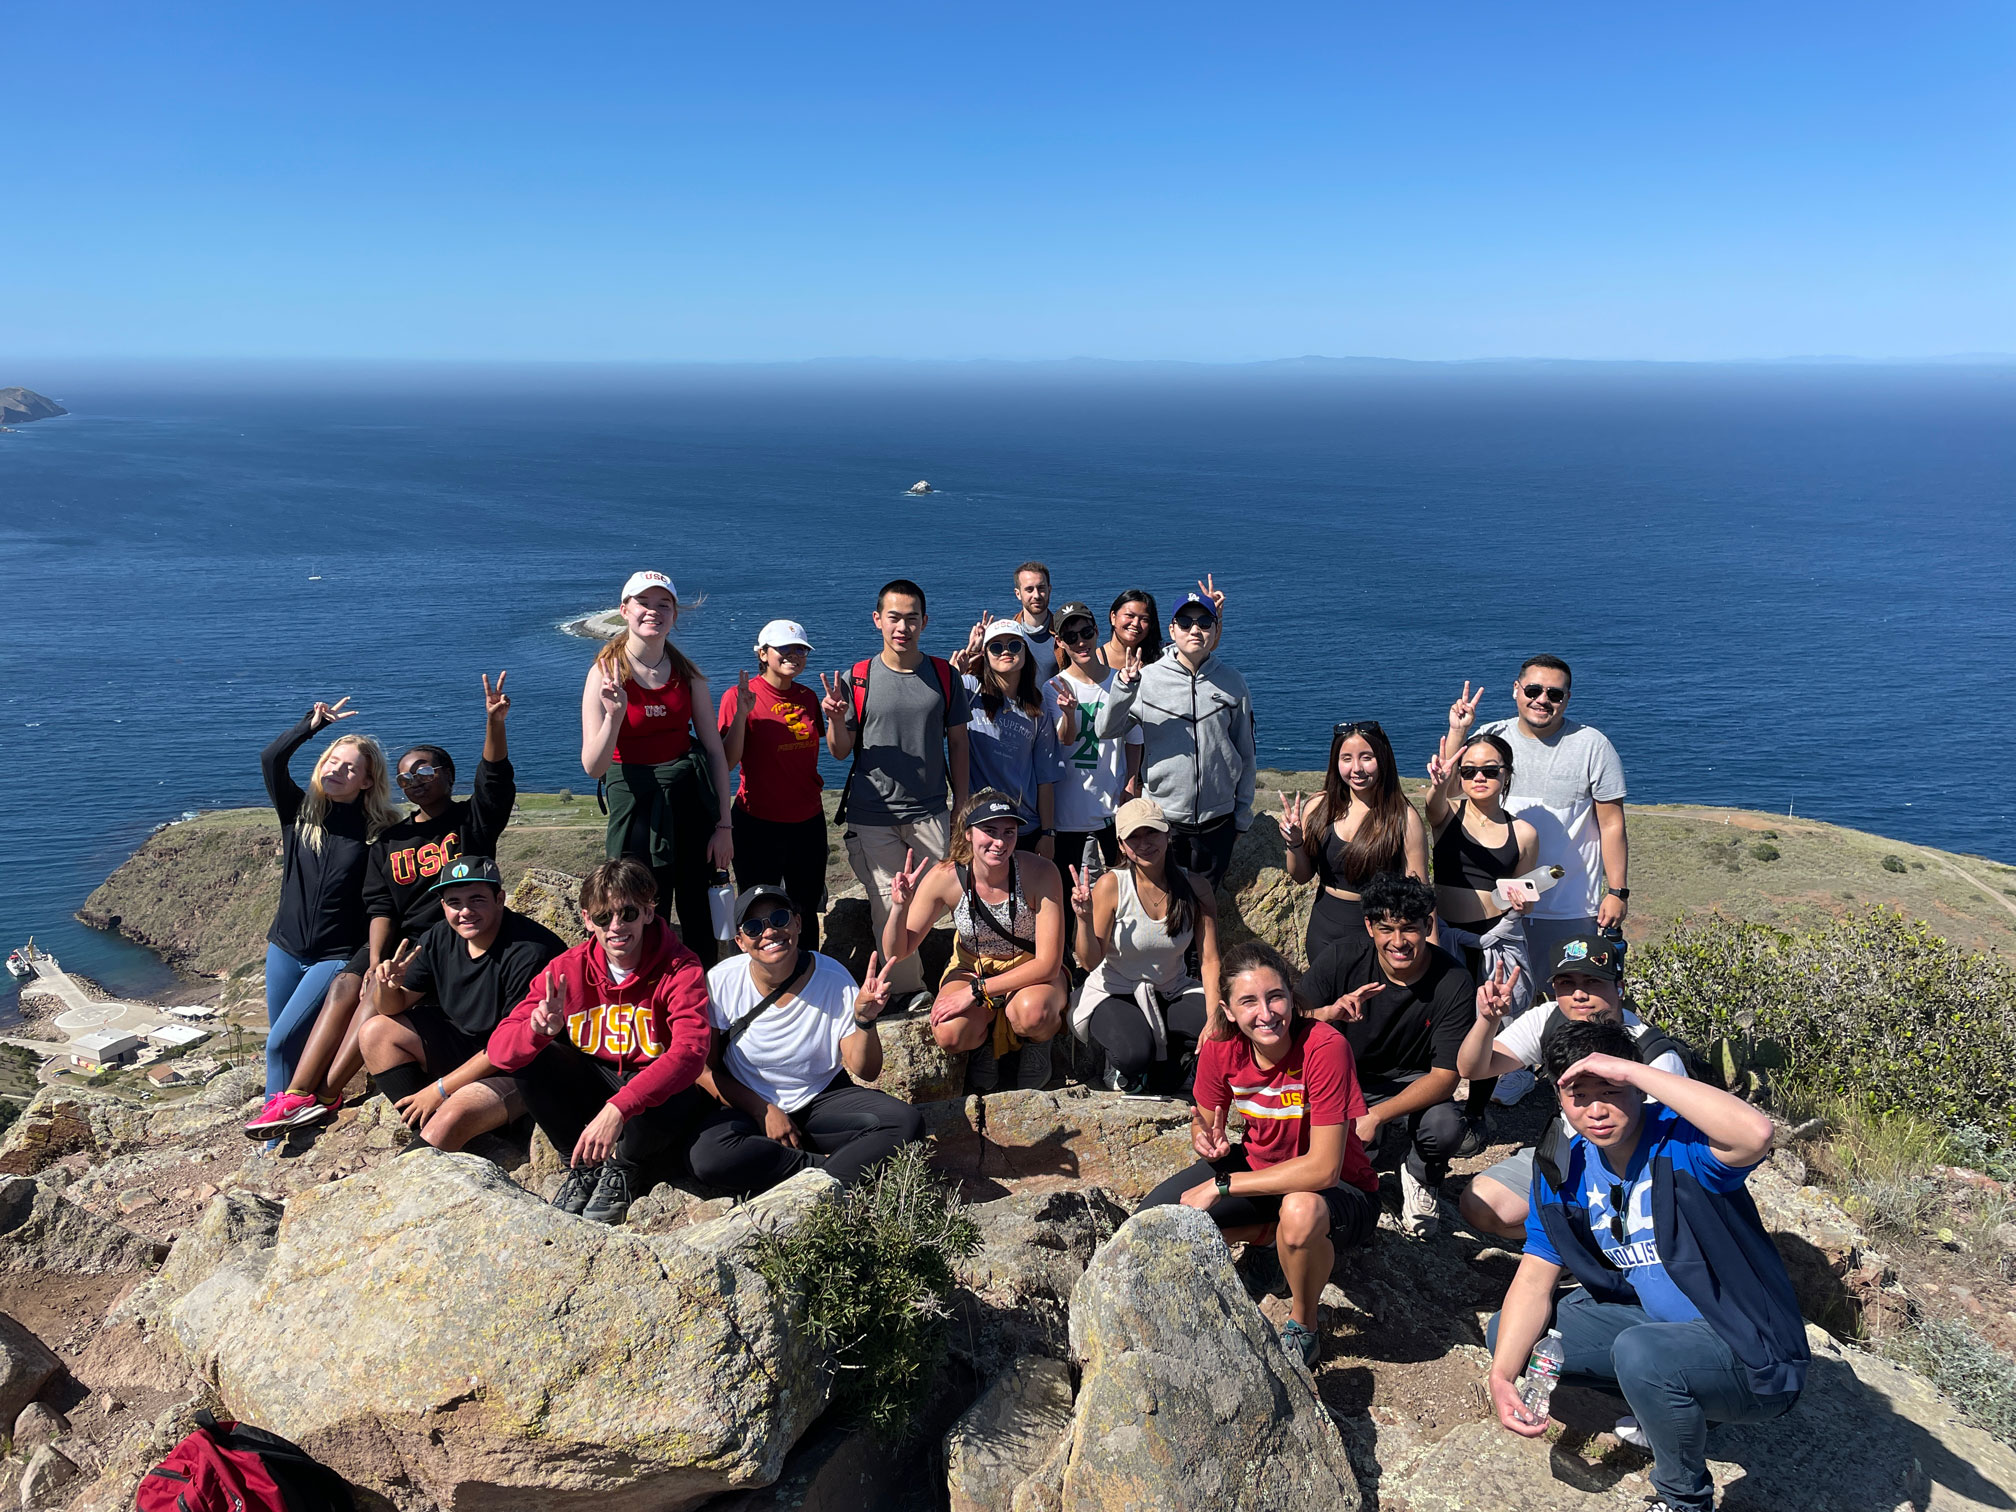 Students pose for a group photo after hiking to the top of a cliff on Catalina Island